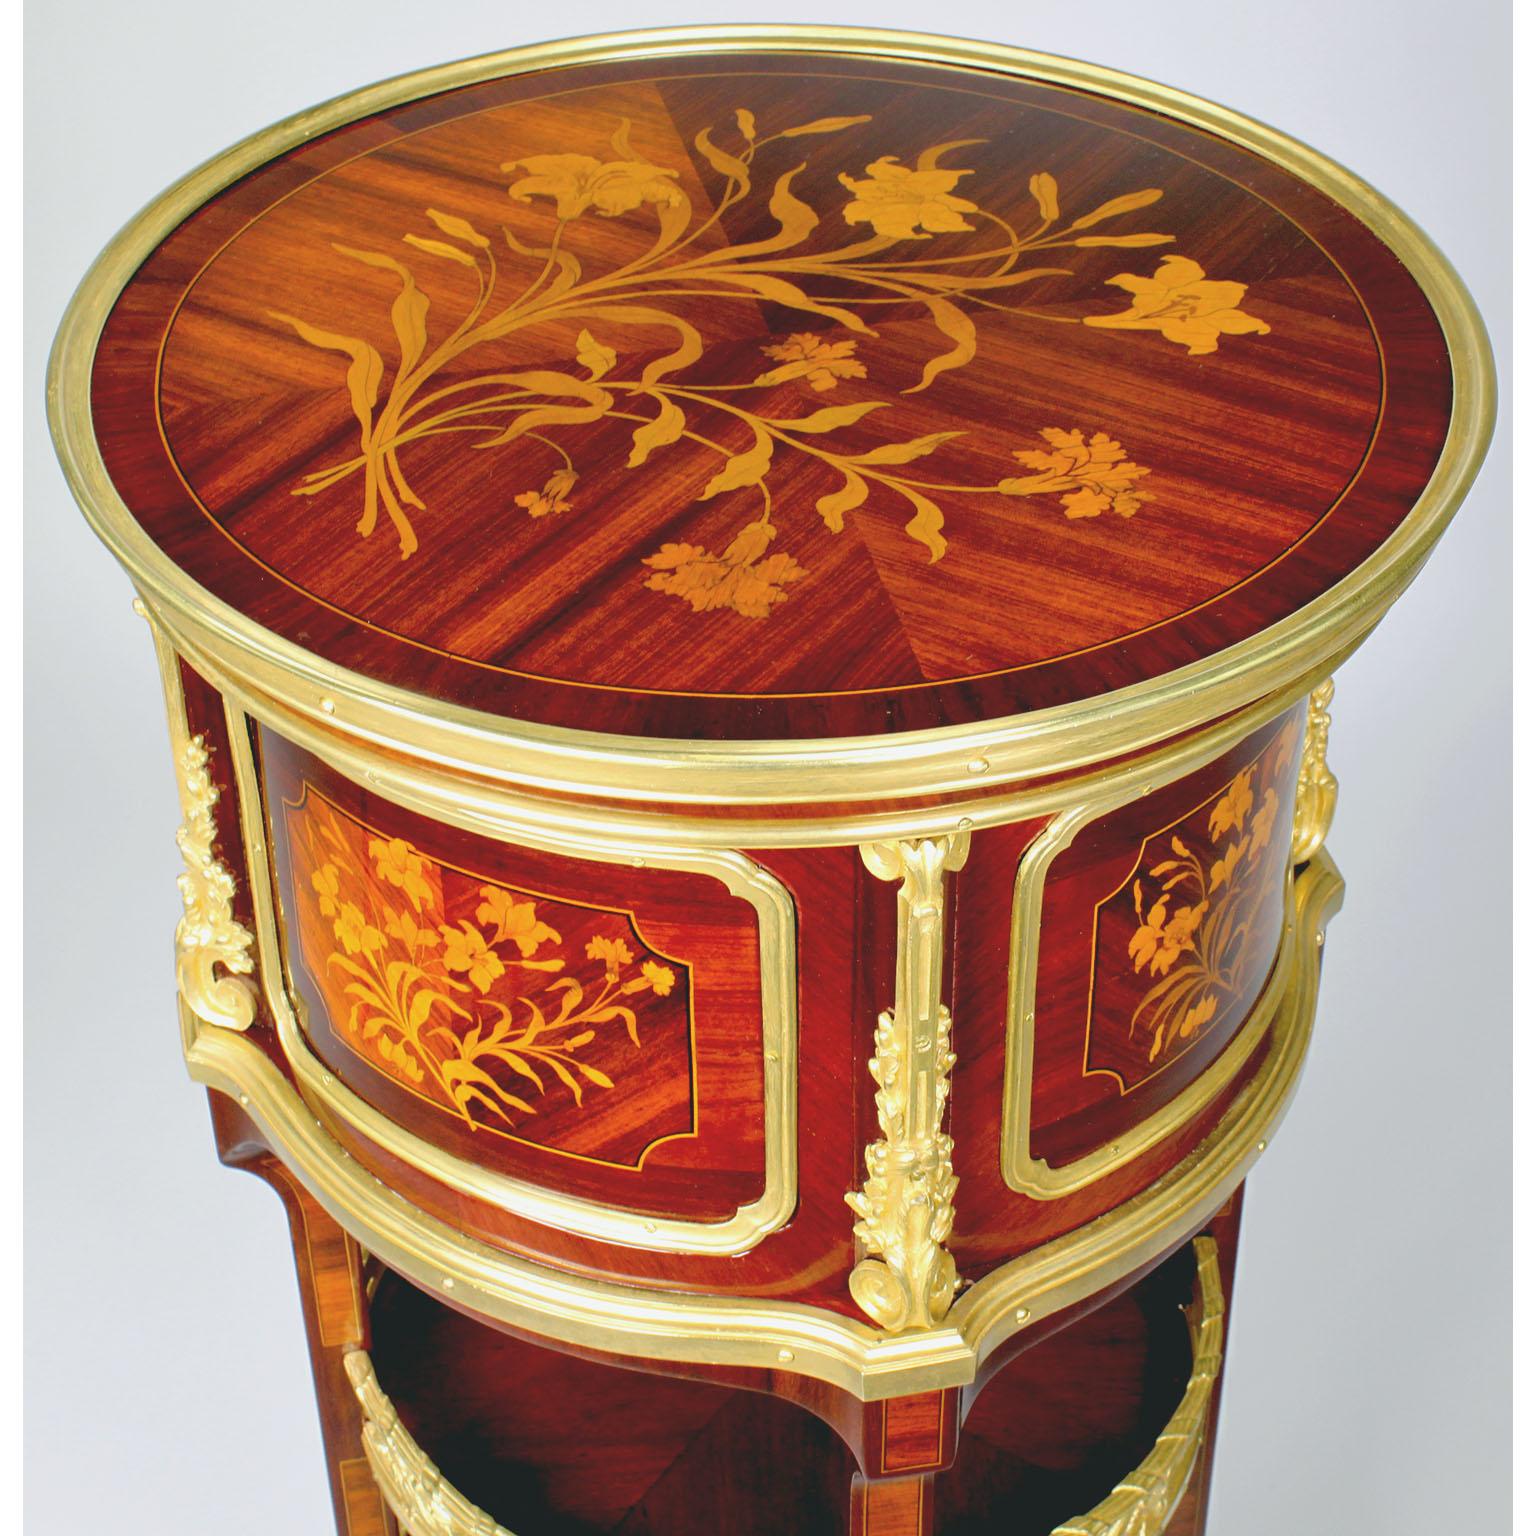 Pr French 19th-20th Century Ormolu Mounted Side-Tables Zwiener-Jansen Successeur For Sale 4